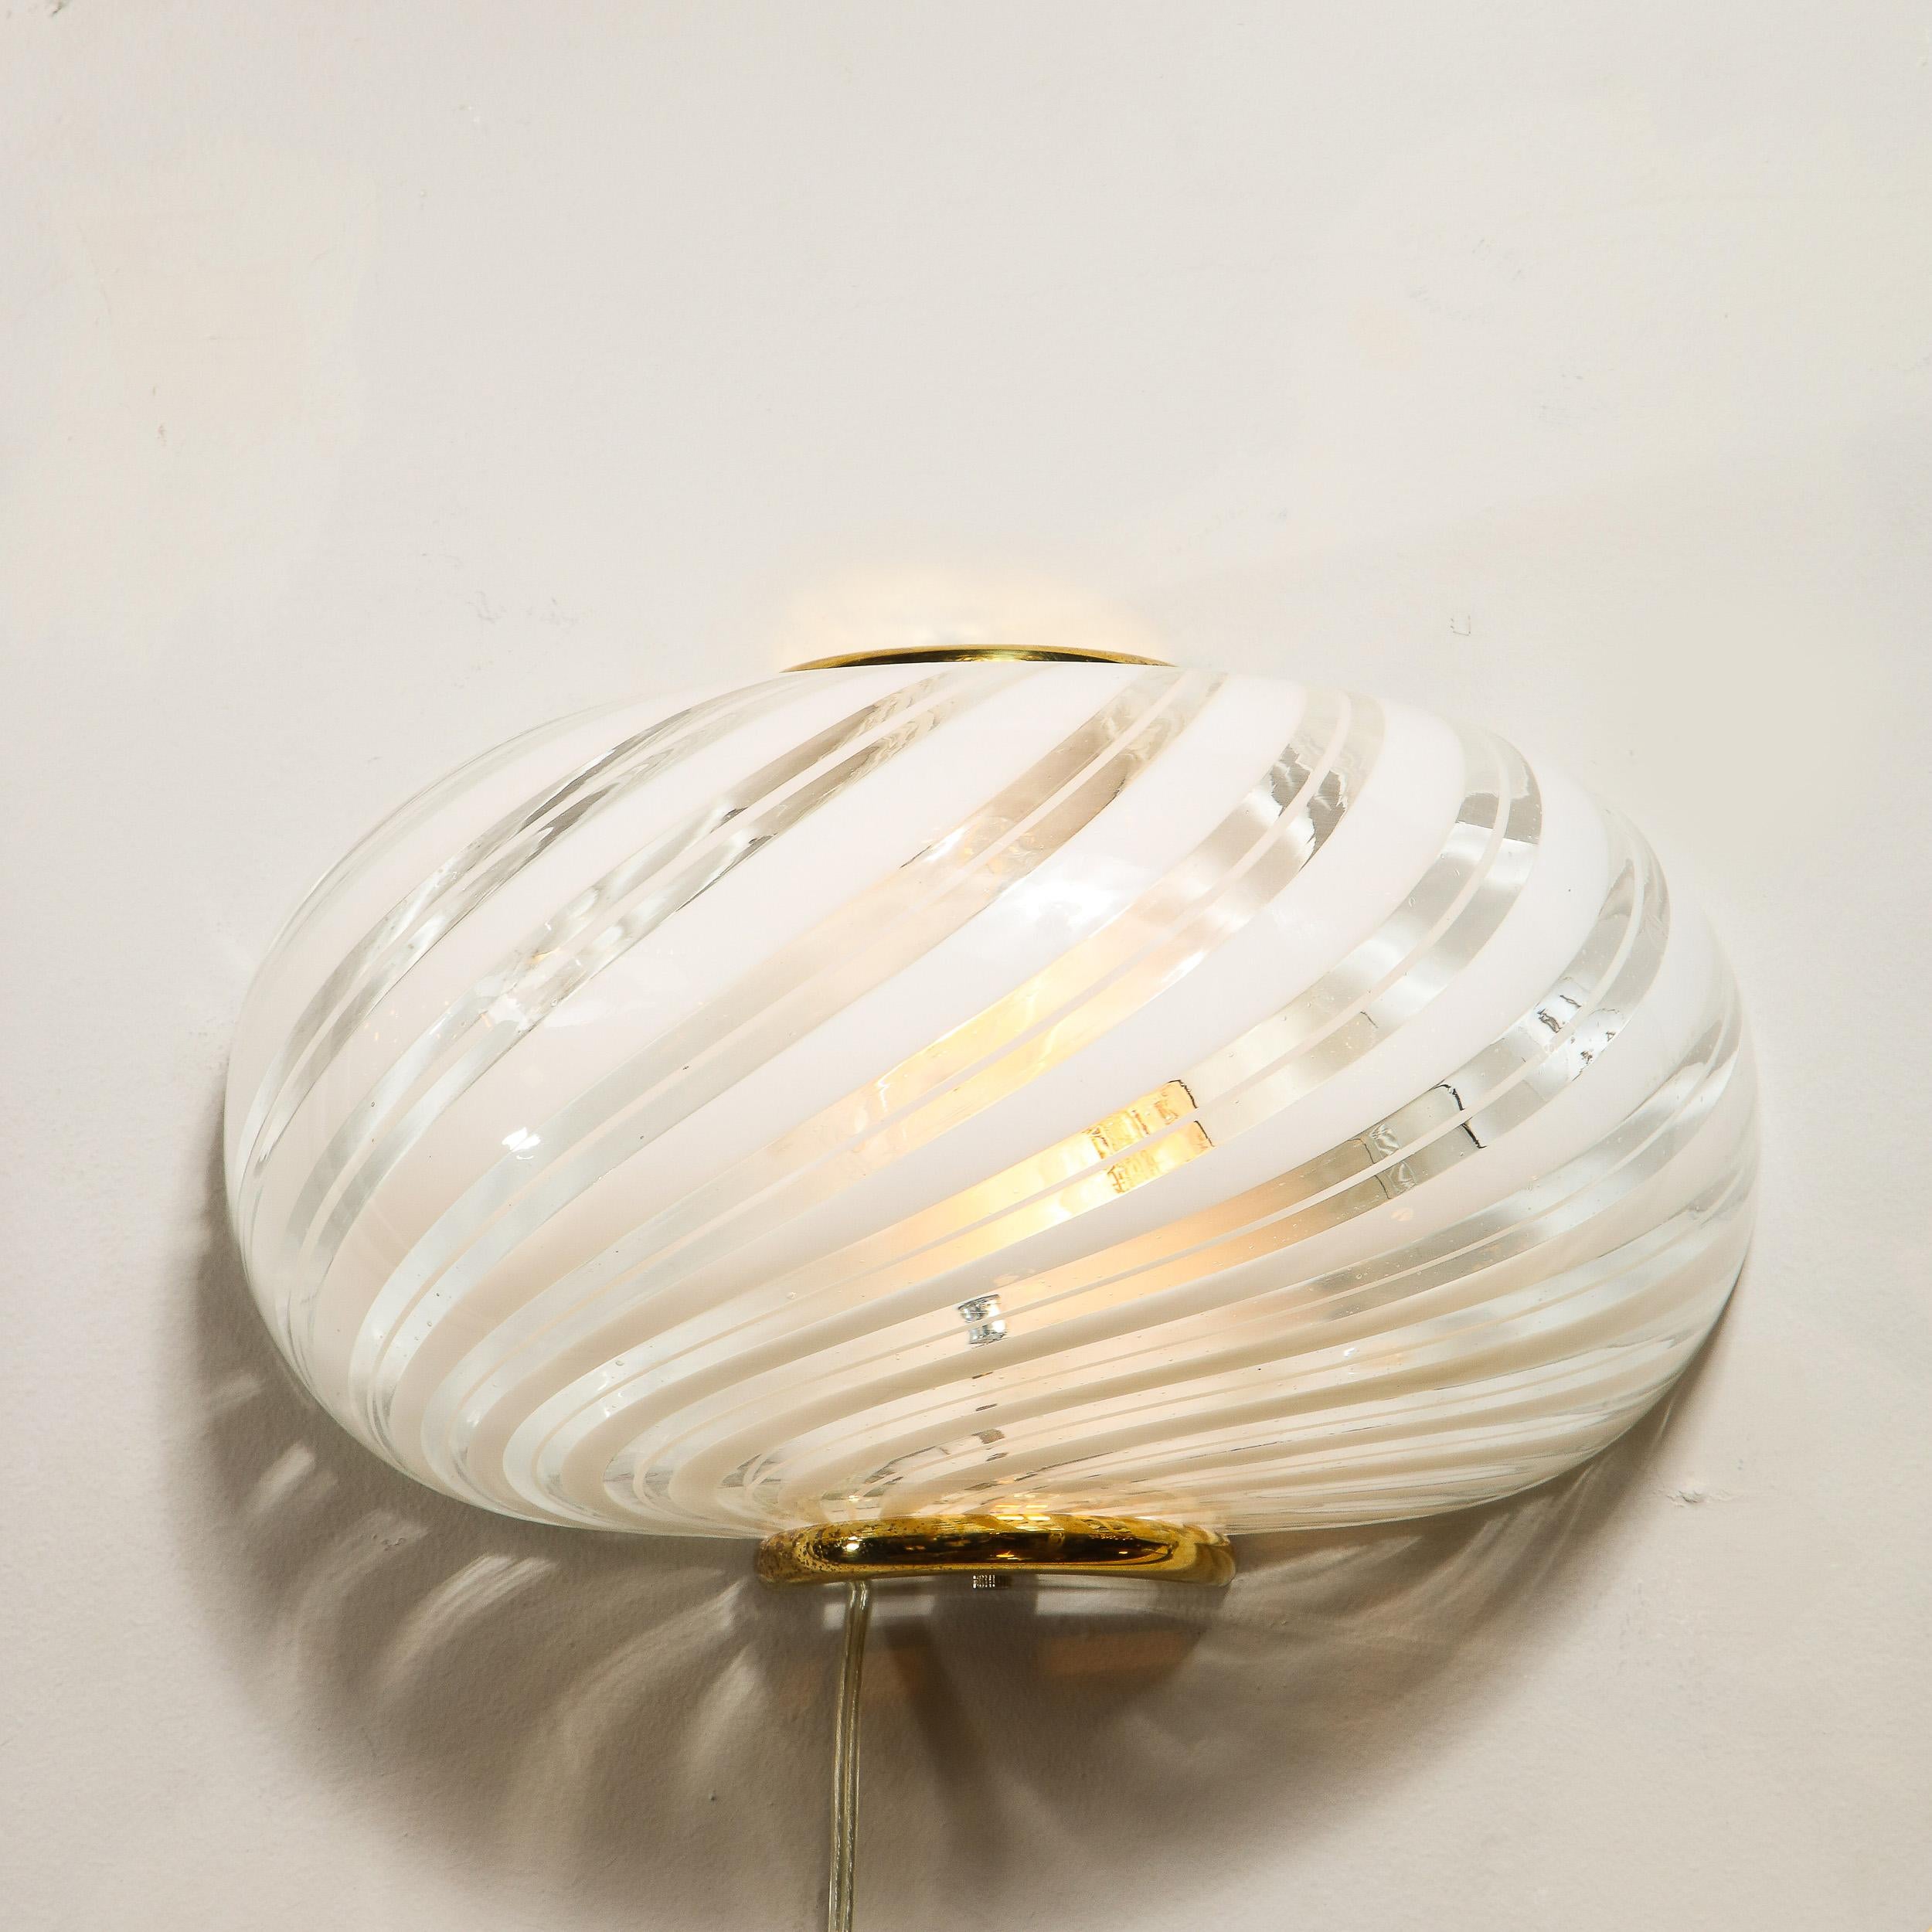 This beautiful handblown glass sconce was realized in Murano, Italy- the island off of Venice renowned for centuries for its superlative glass production, circa 1980. It features a rounded ovoid body in translucent murano glass with candy striped